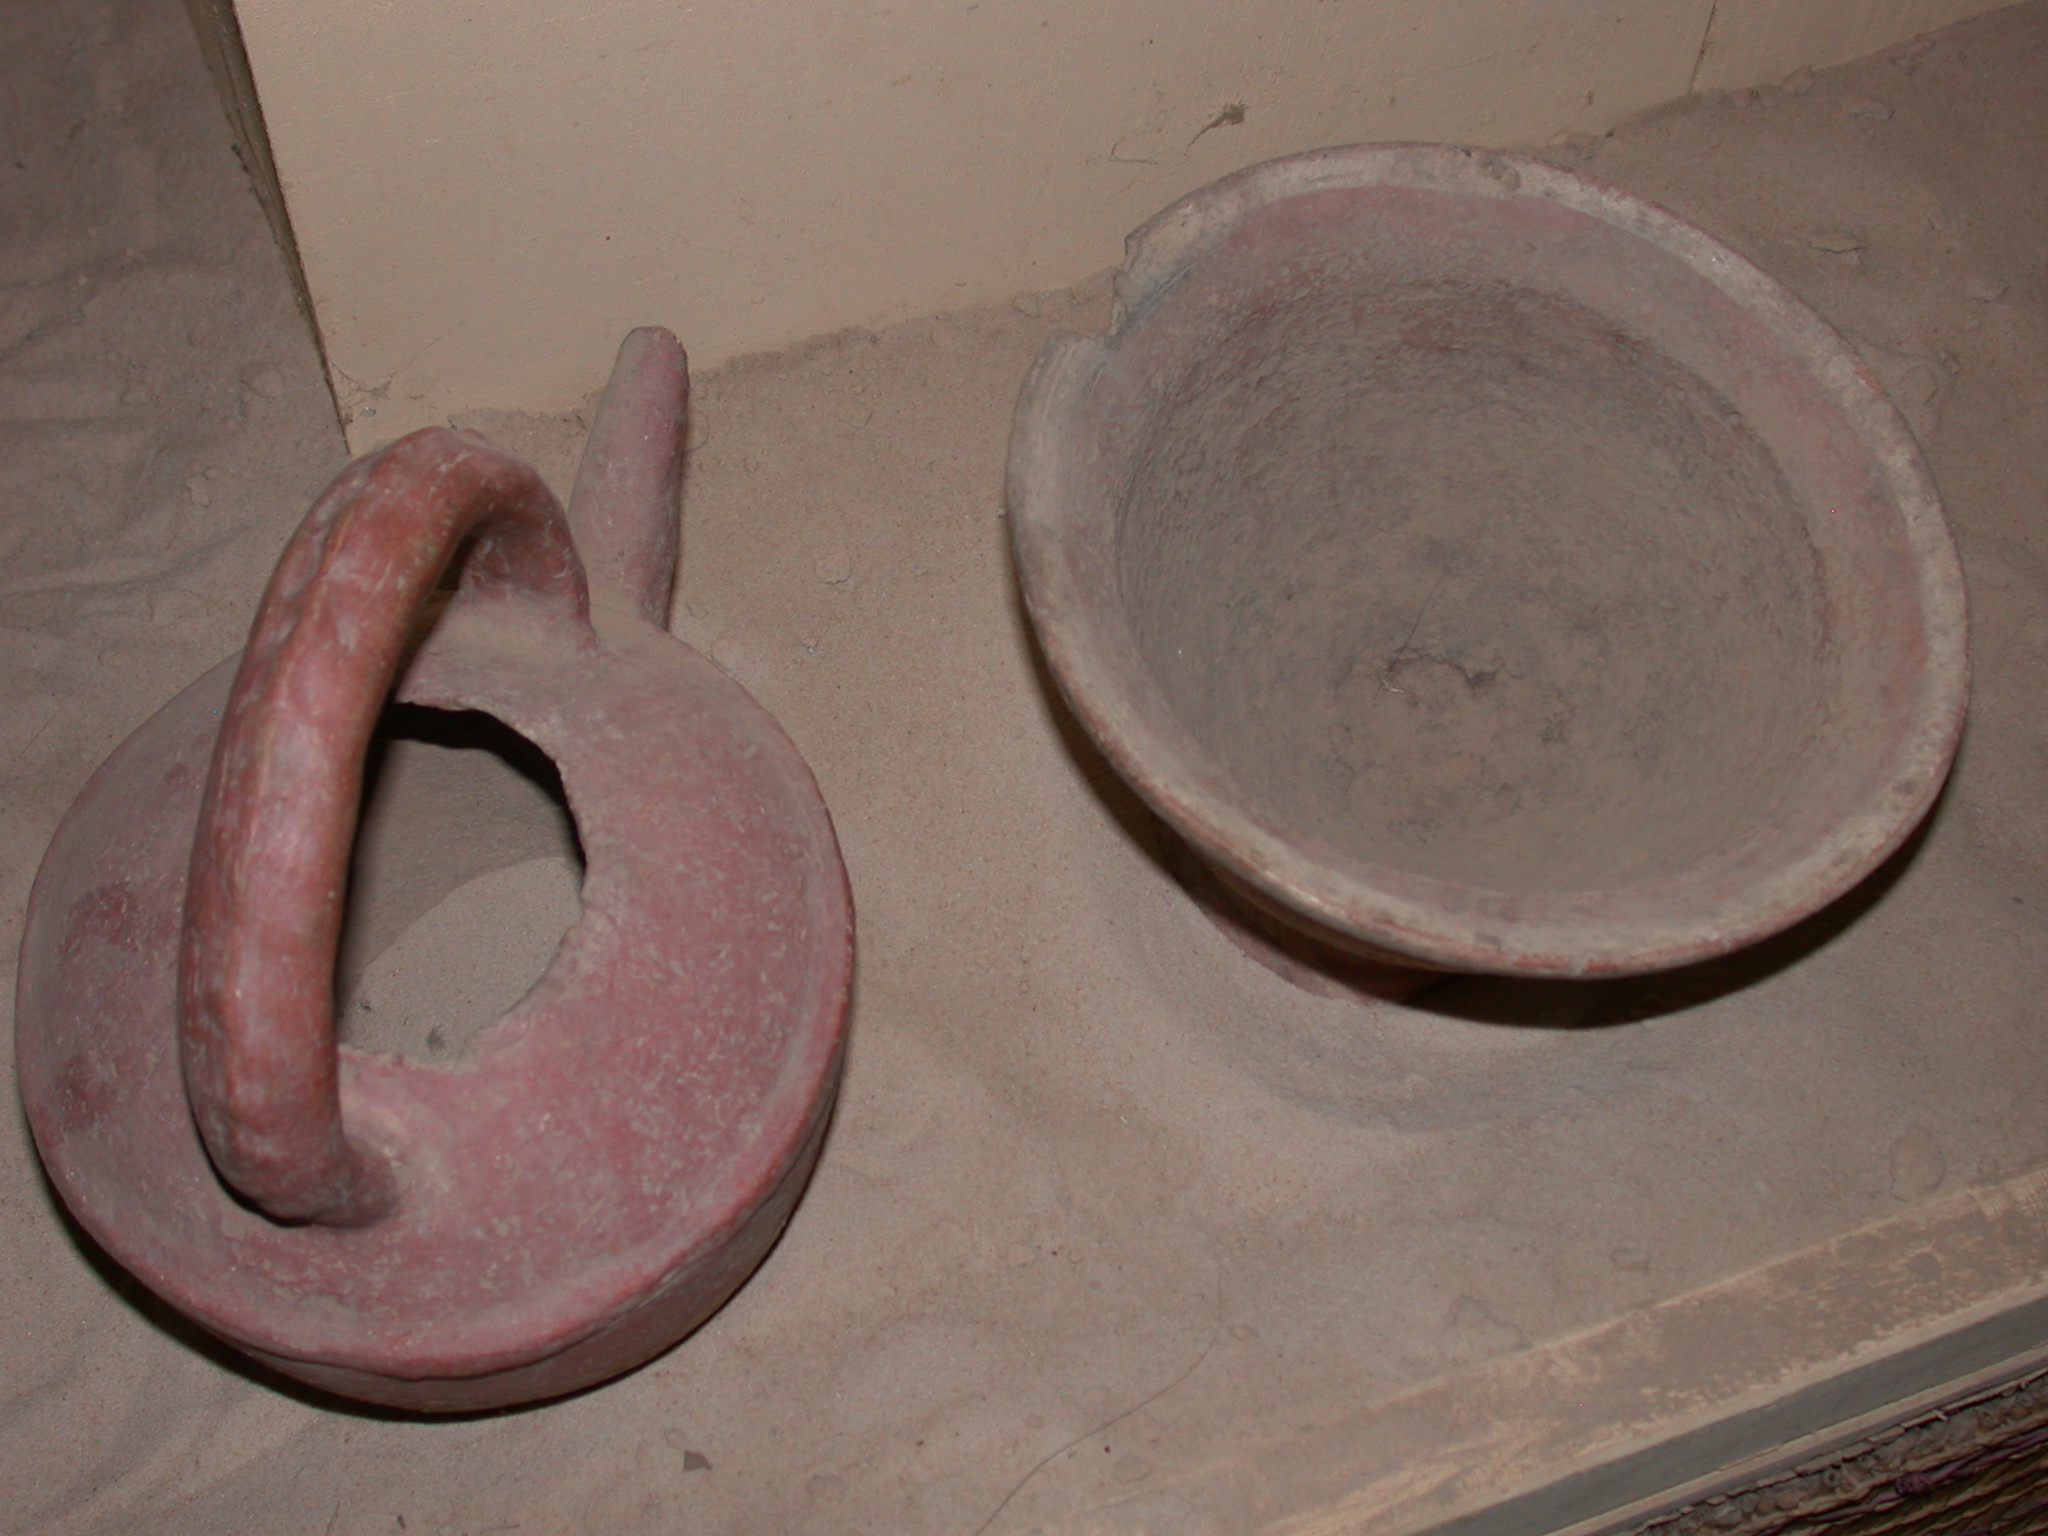 Pitcher and Vase for Washing Hands Before and After Meals, Timbuktu Ethnological Museum, Timbuktu, Mali